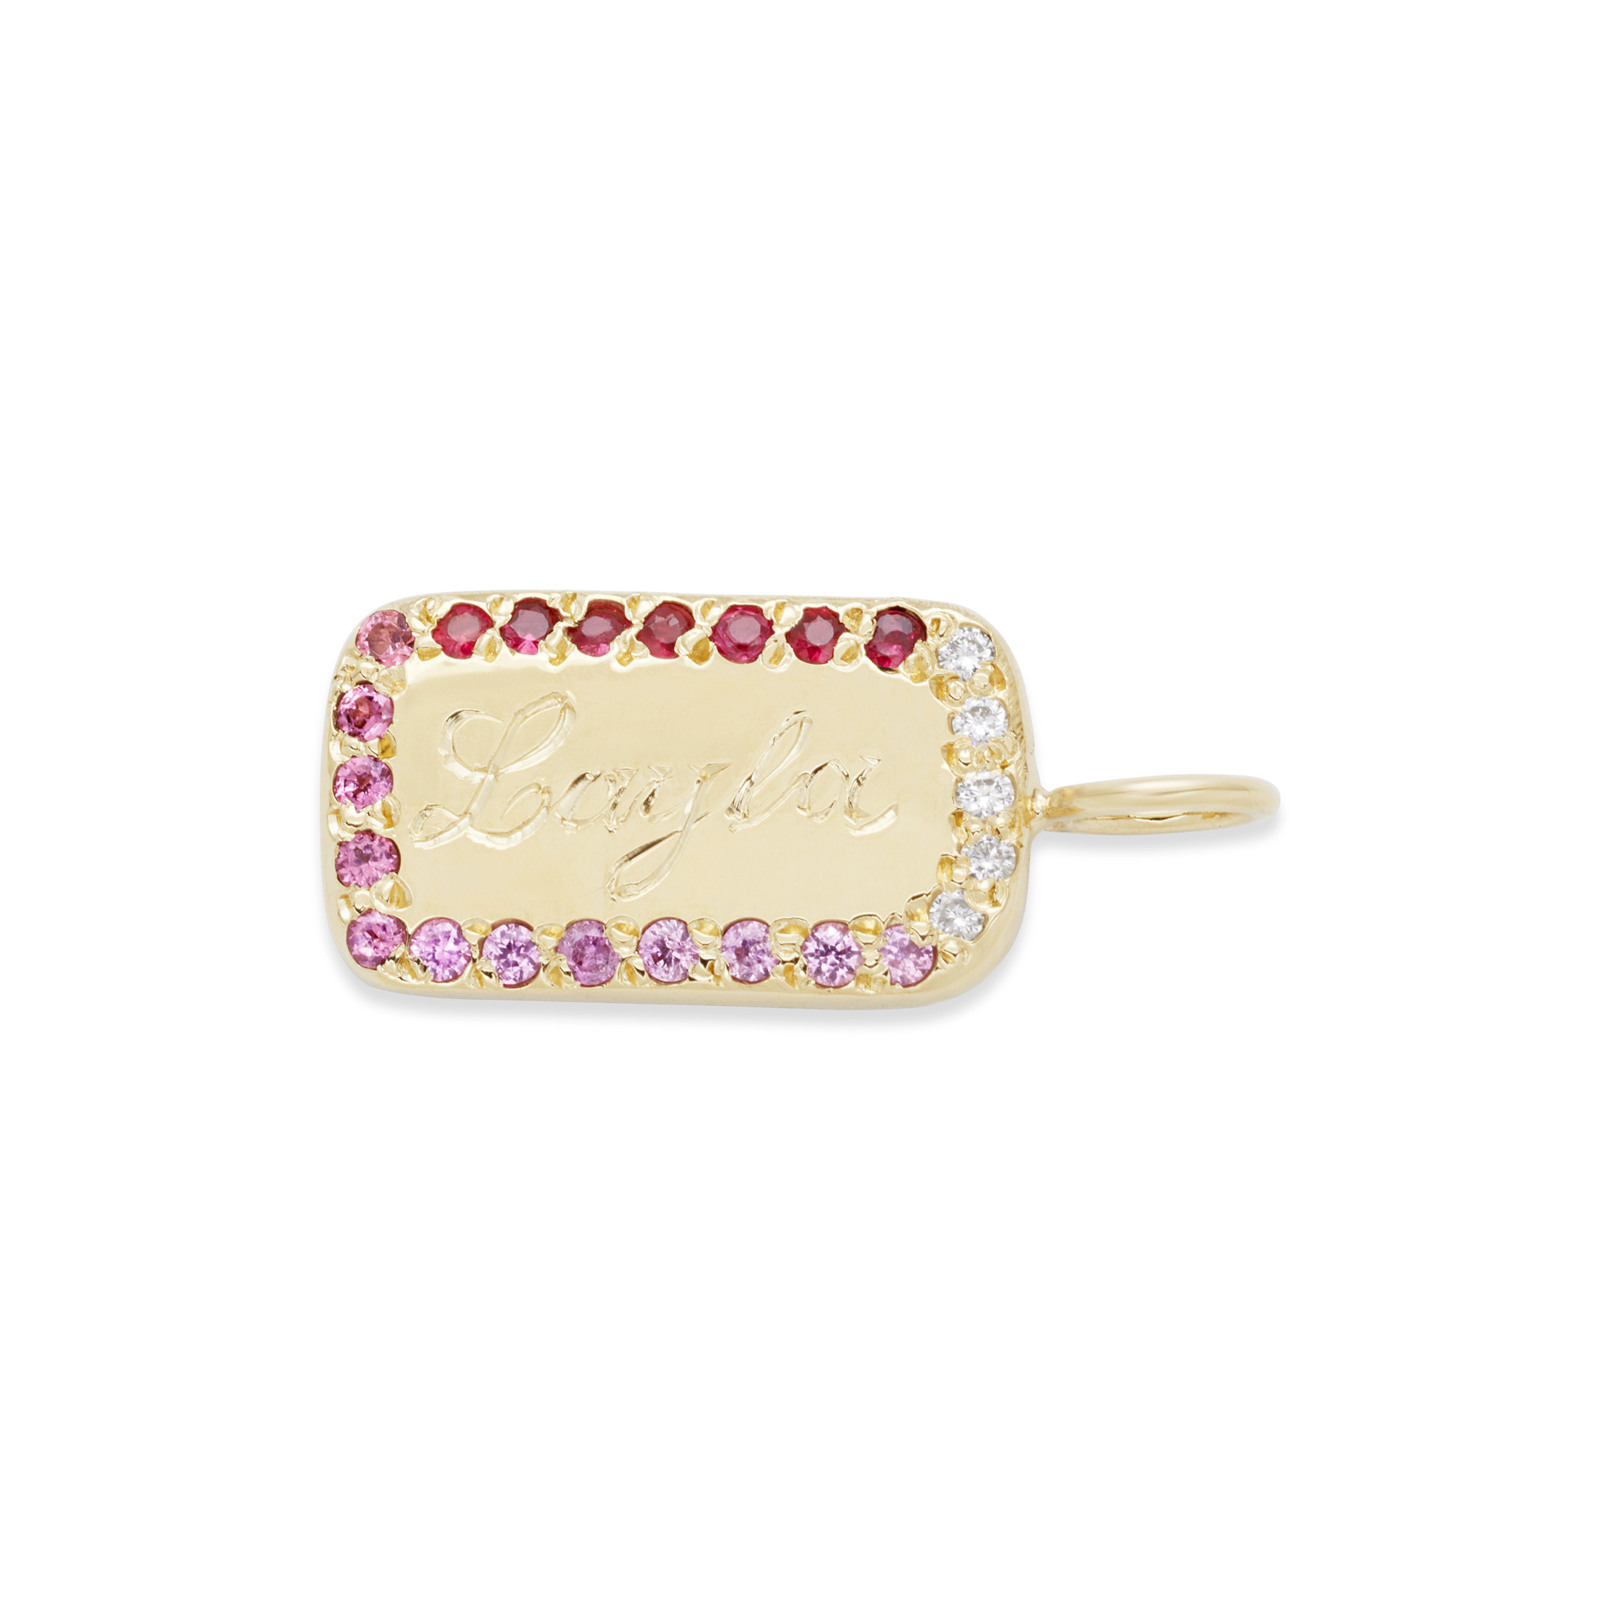 Custom Gold ID Tablet Engraving Charm with personalized birthstones in 14k yellow gold